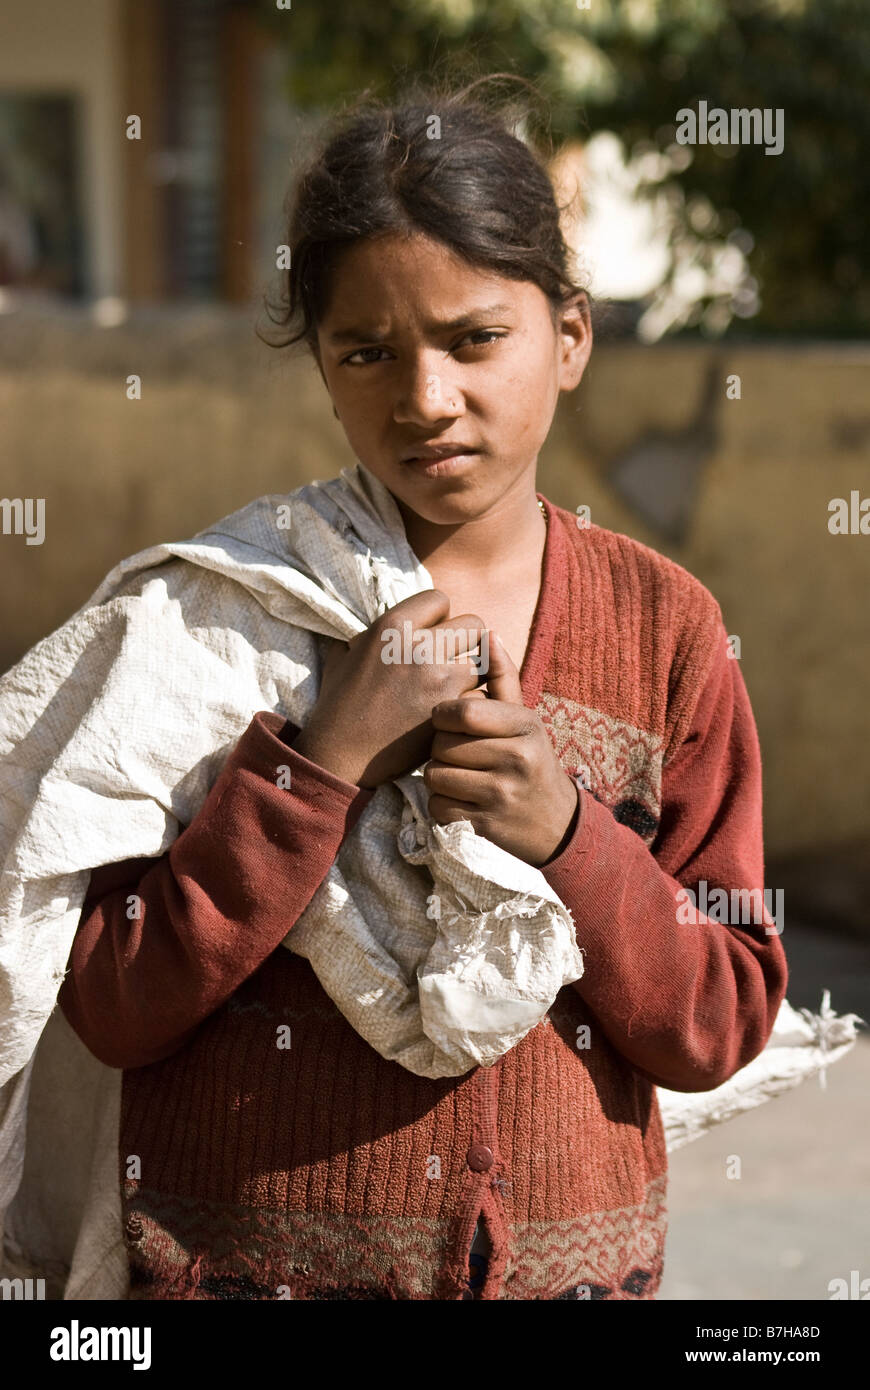 A child begging amongst the tourists within Rajasthans capital. Stock Photo